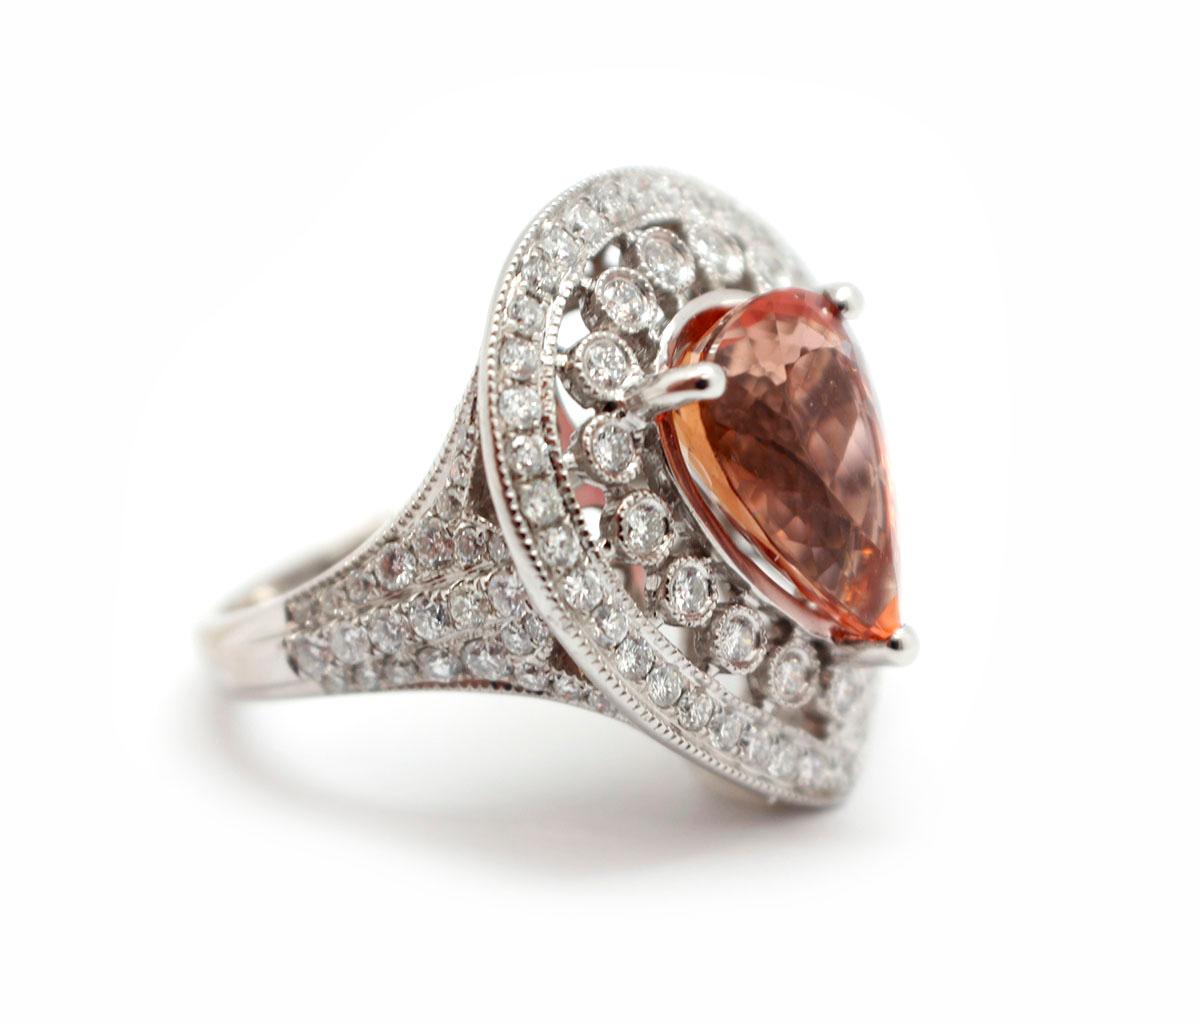 This stunning piece is made in solid 18k white gold. It features a pear-cut 4.50-carat Imperial topaz at its center. The stone is adorned by stunning diamonds that echo the pear shape of the stone. The diamonds have an additional weight of 1.18